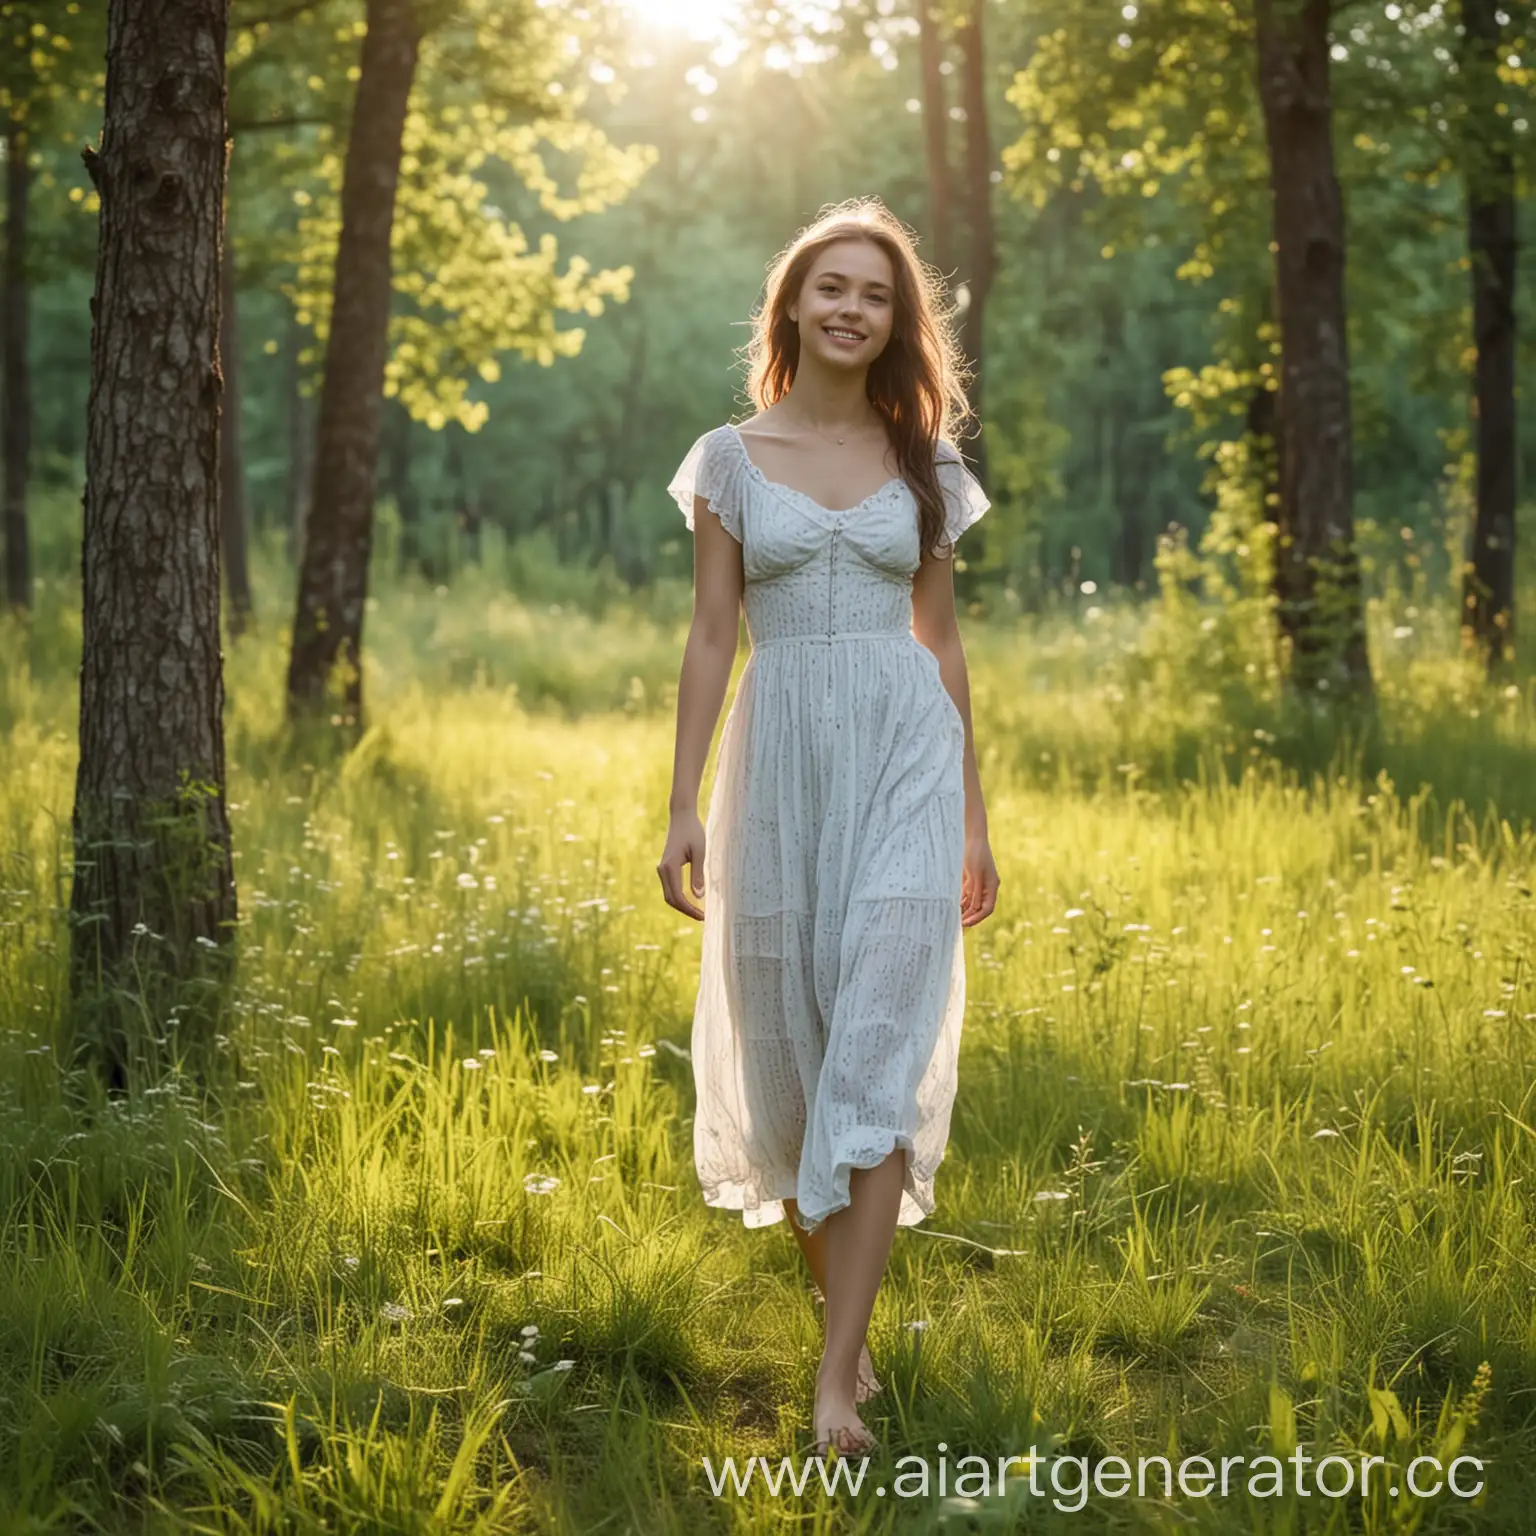 Young-Woman-Walking-in-Morning-Meadow-Near-Forest